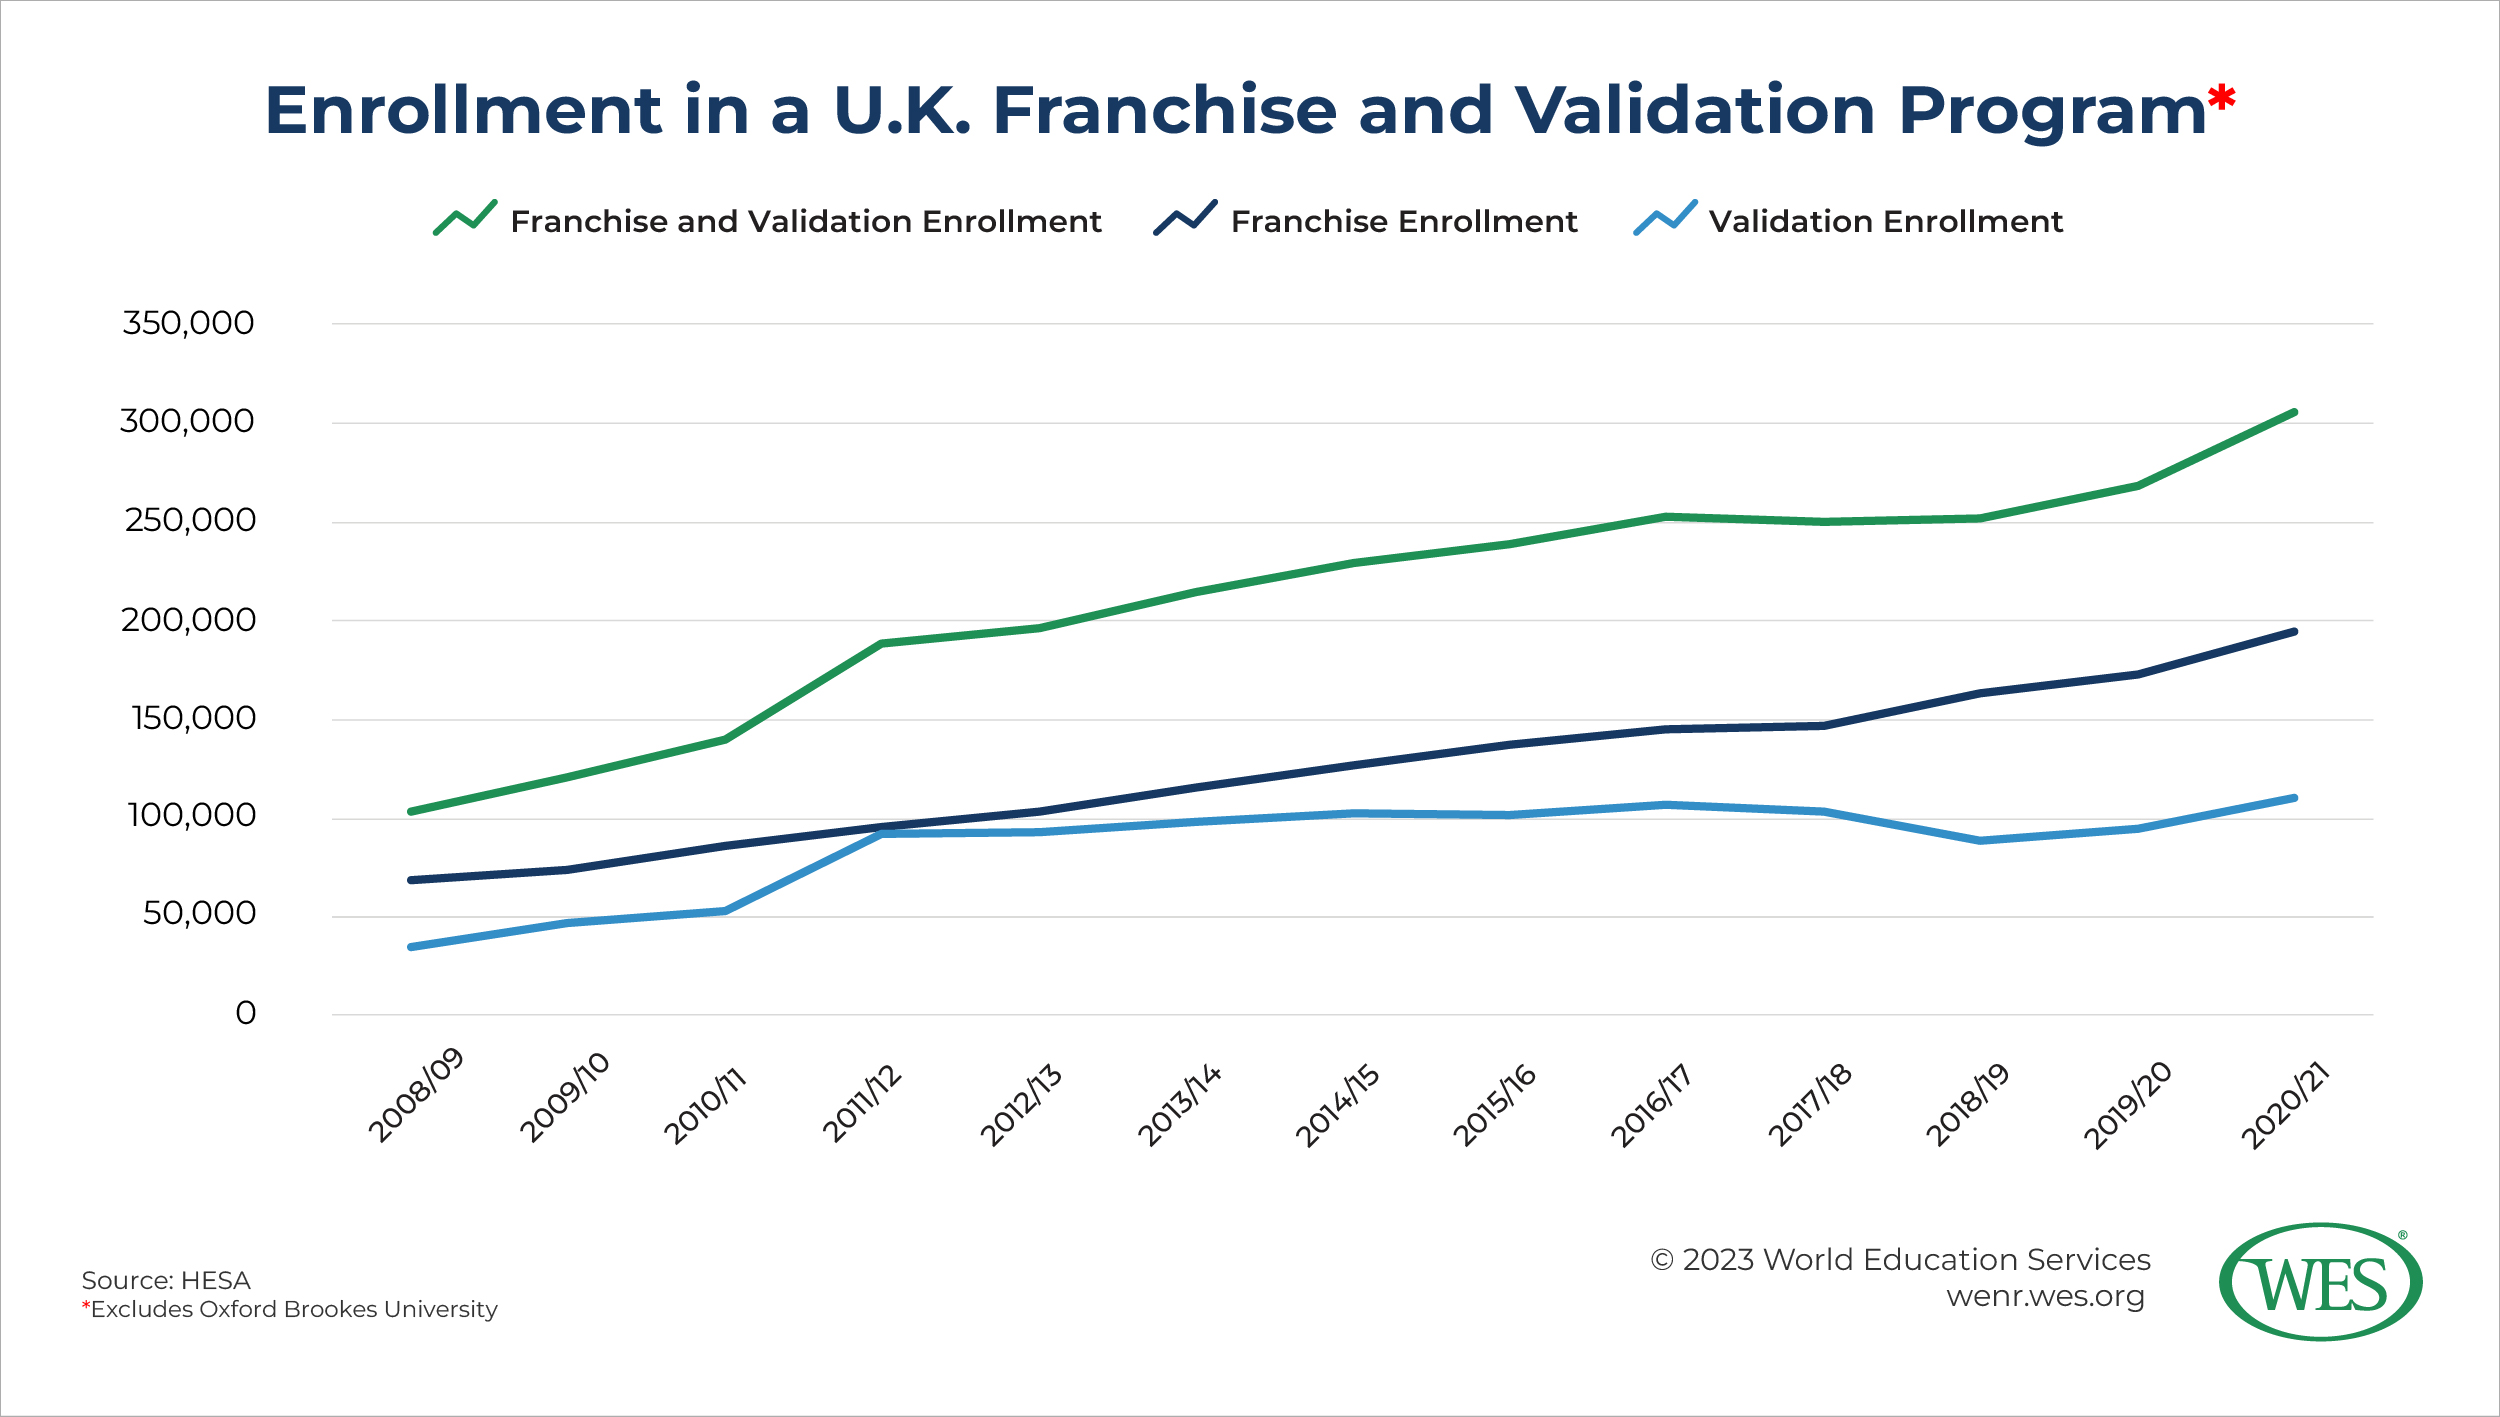 A chart showing annual enrollment in a U.K. franchise and validation program between 2008/09 and 2020/21.